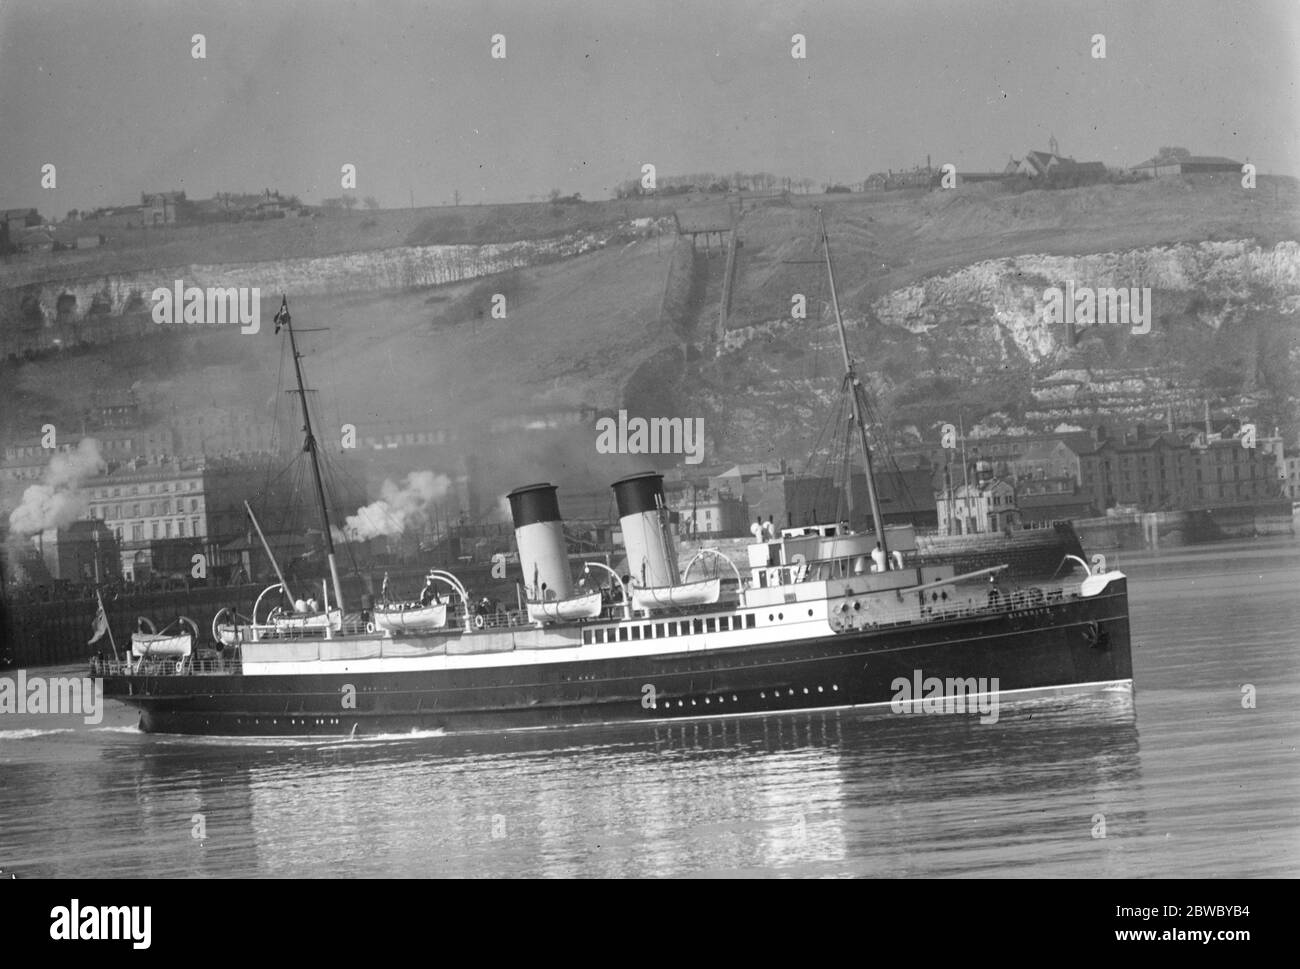 The King 's holiday begun . The King and Queen left Dover for their Mediterranean cruise . The steamer Biarritz leaving Dover for Calais . 19 March 1925 Stock Photo